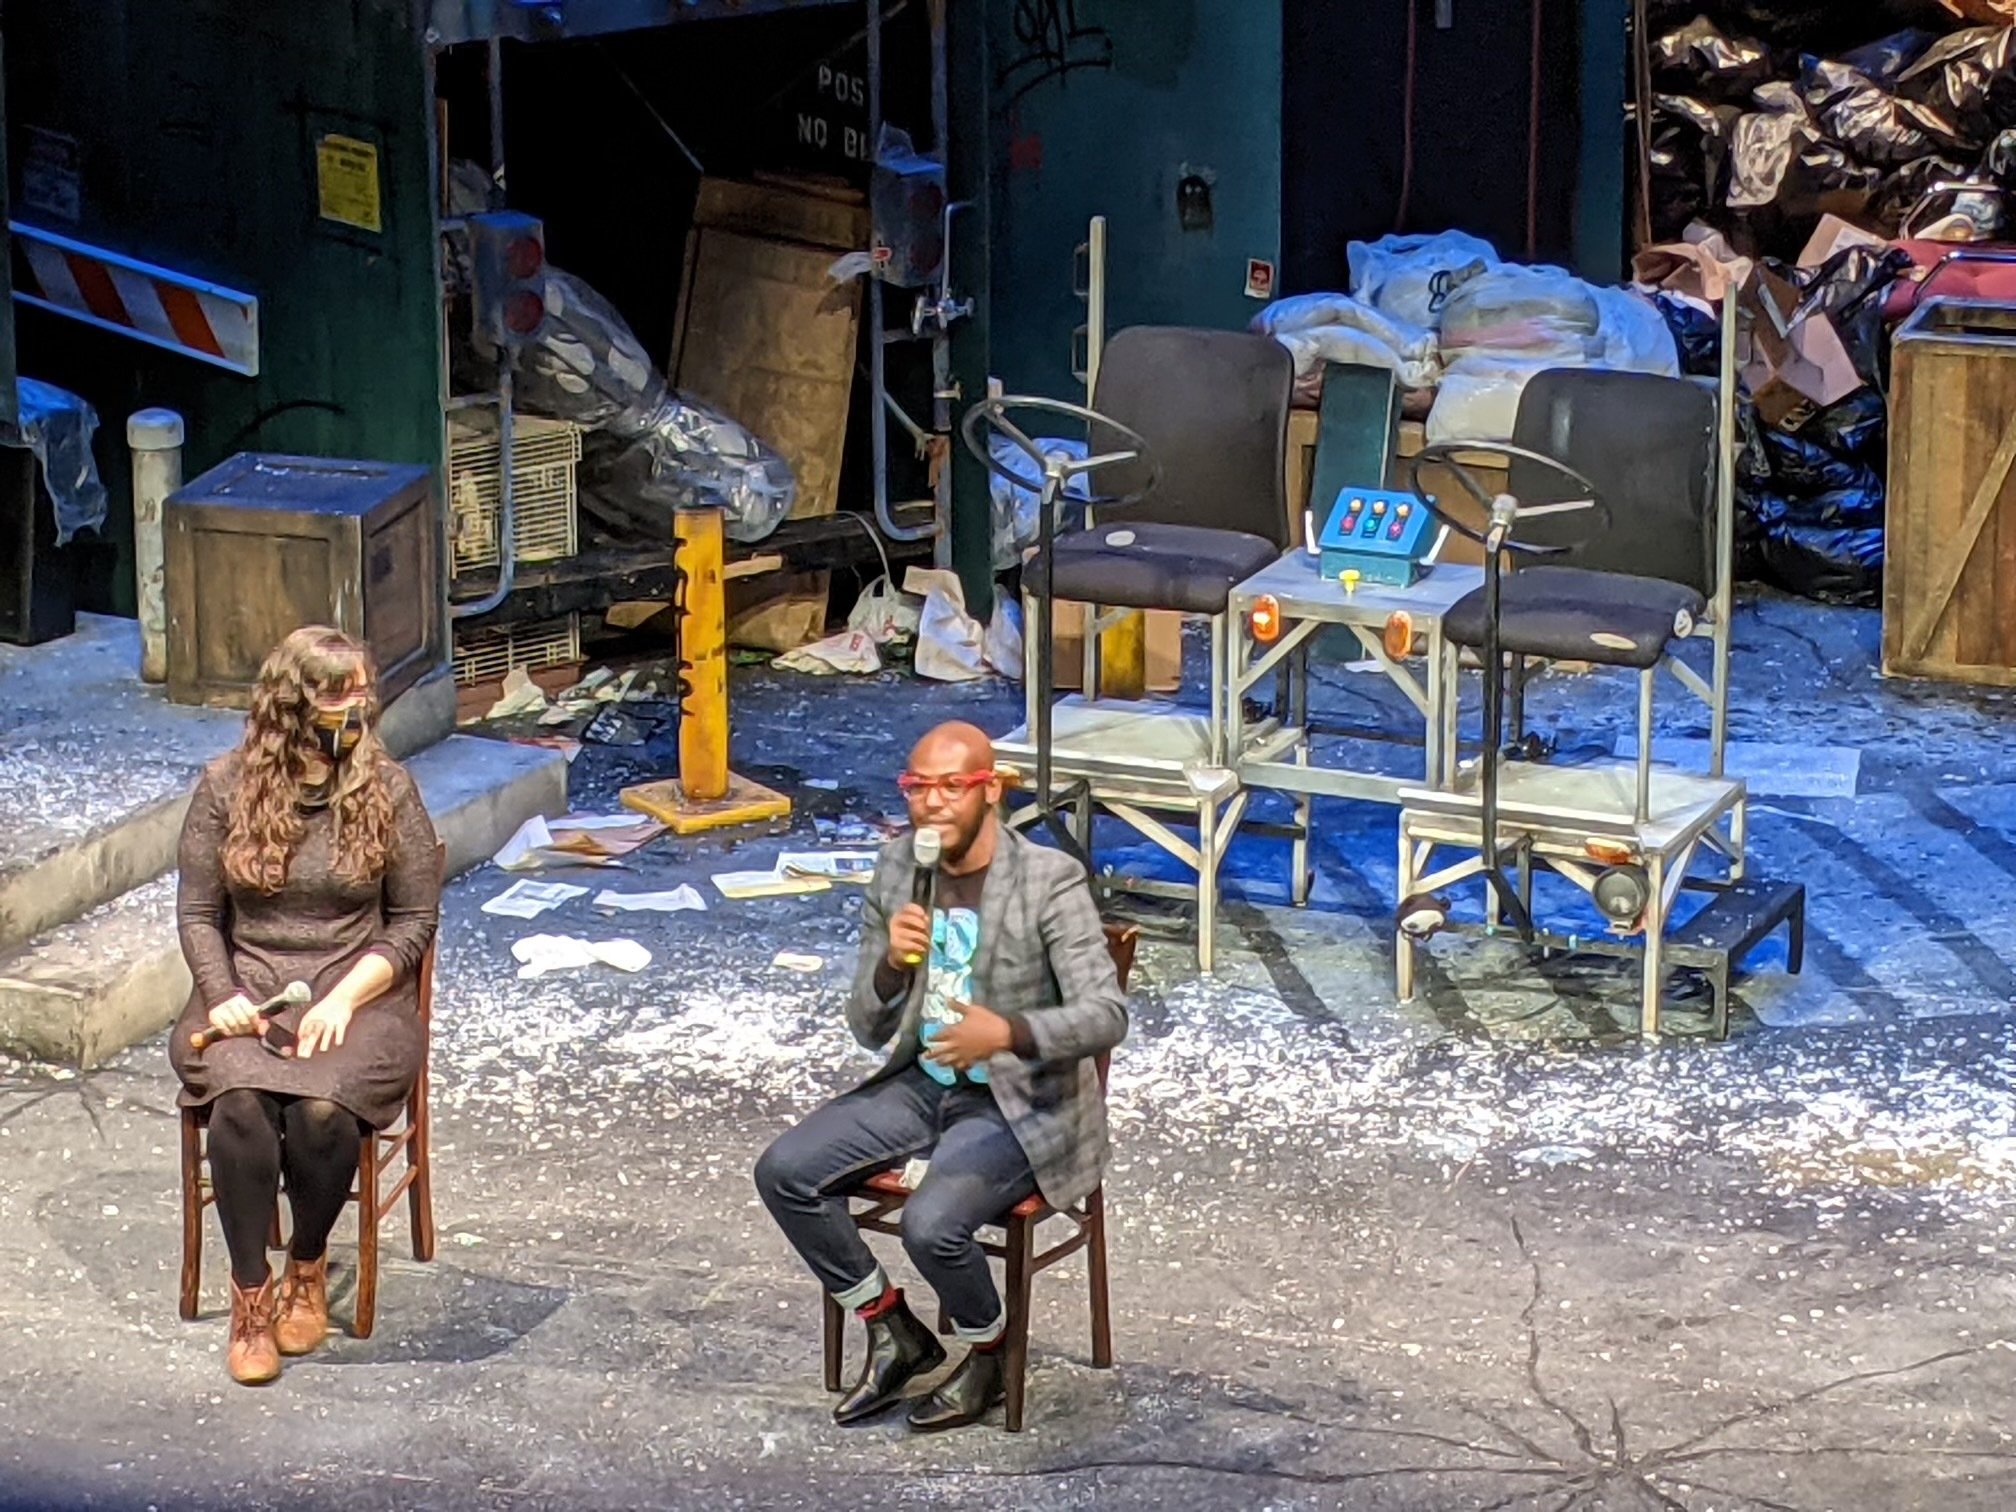 two people sit on chairs on a theater stage, one with a microphone